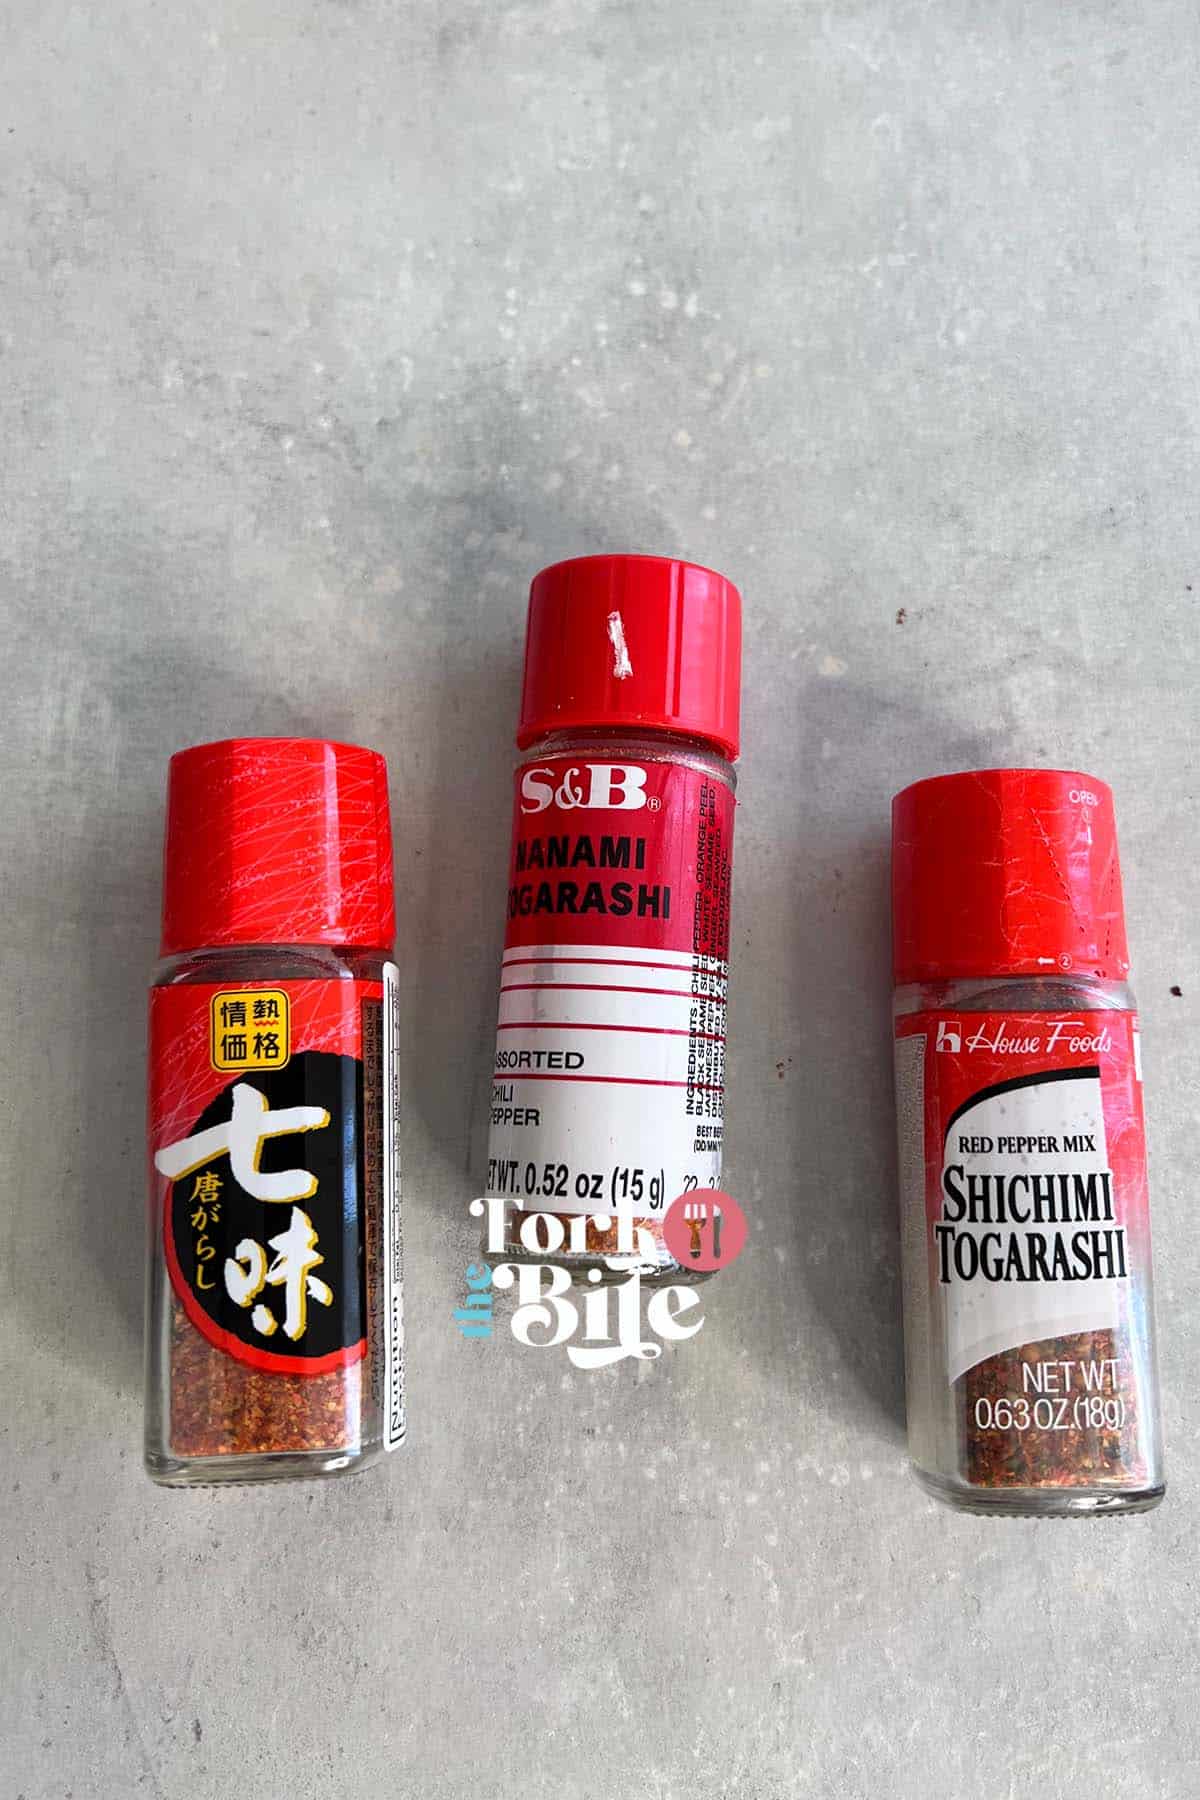 Togarashi, or as we also know it, Shichimi Togarashi, is a spicy blend with a kick. It typically combines seven ingredients, which can vary but often include chili pepper, orange peel, black and white sesame seeds, Japanese pepper (Sansho), ginger, and seaweed.